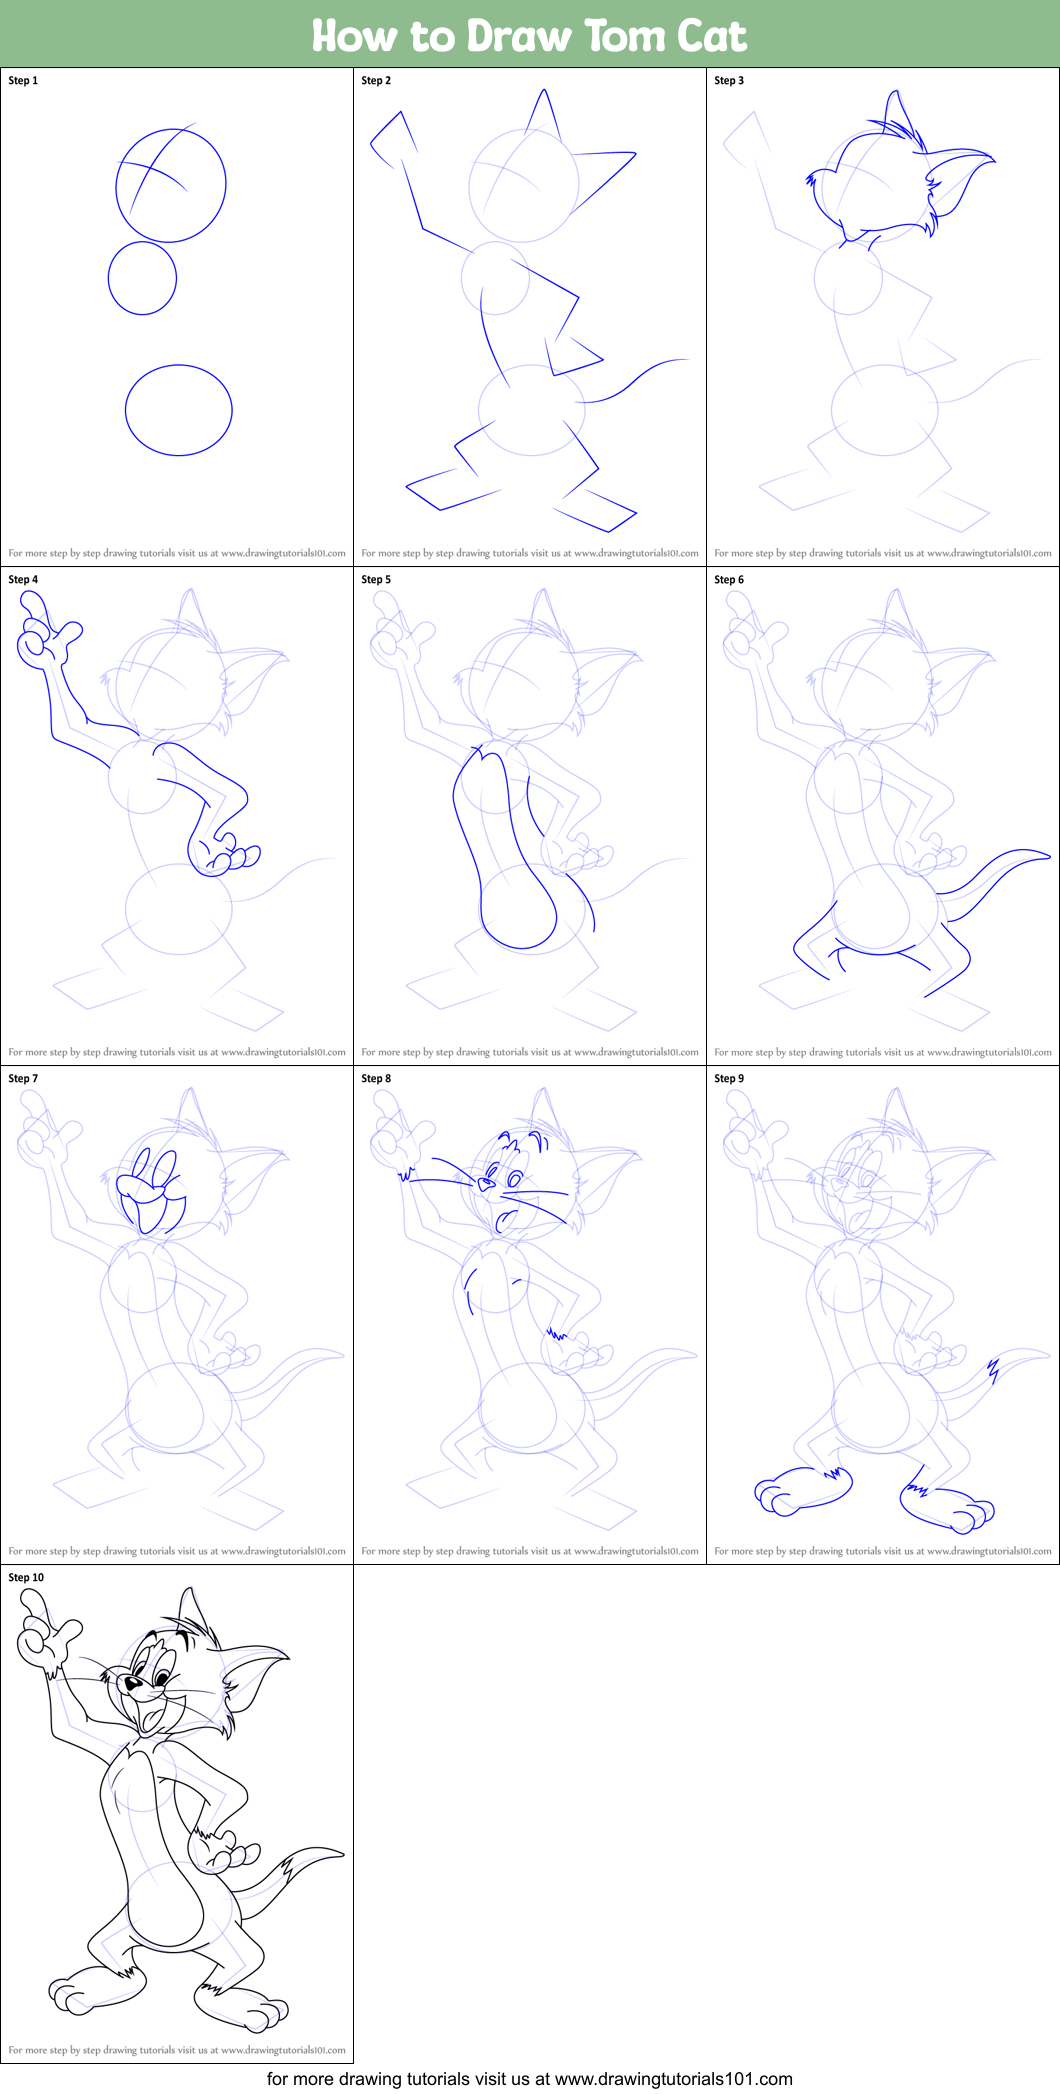 How to Draw Tom Cat printable step by step drawing sheet